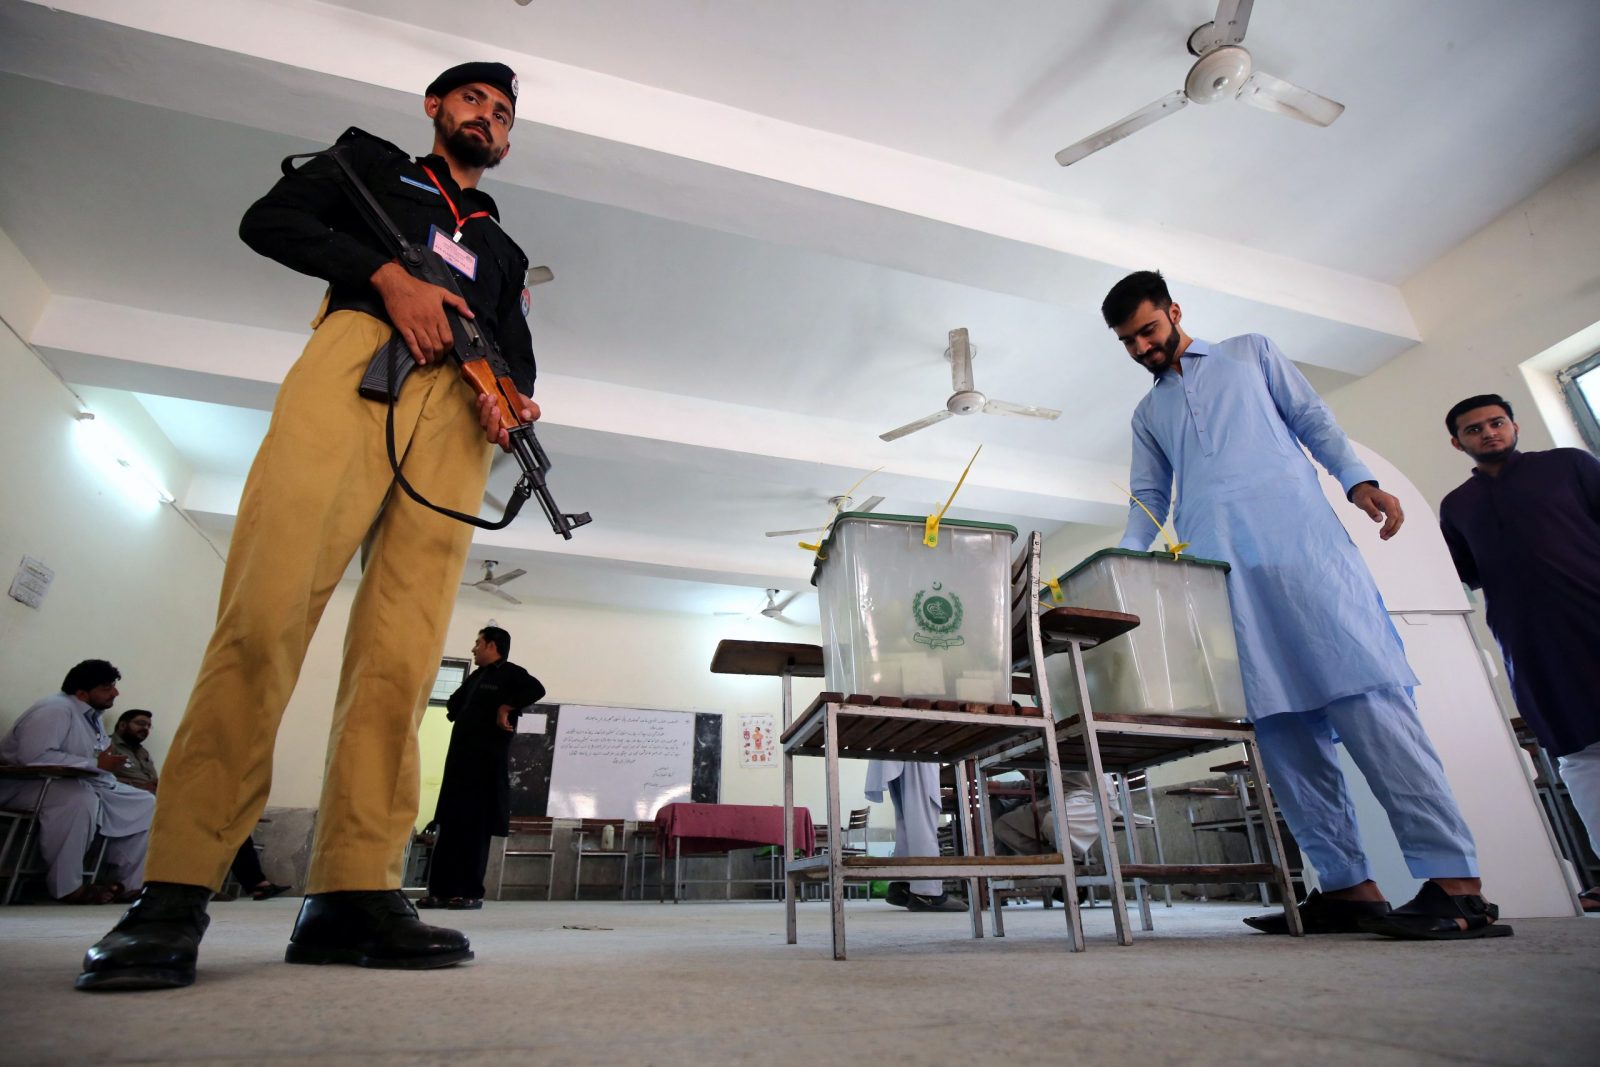 epa10246926 A police officer stands guard as a man casts his ballot at a polling station during by-elections in Peshawar, Khyber Pakhtunkhwa province, Pakistan, 16 October 2022.Polling for by-elections on eight seats of National Assembly and three seats of Punjab Assembly is underway. Imran Khan, former Prime Minister and head of the opposition political party Pakistan Tehrik-e-Insaf, is running to defend his seven constituencies of National Assembly seats.  EPA/ARSHAD ARBAB